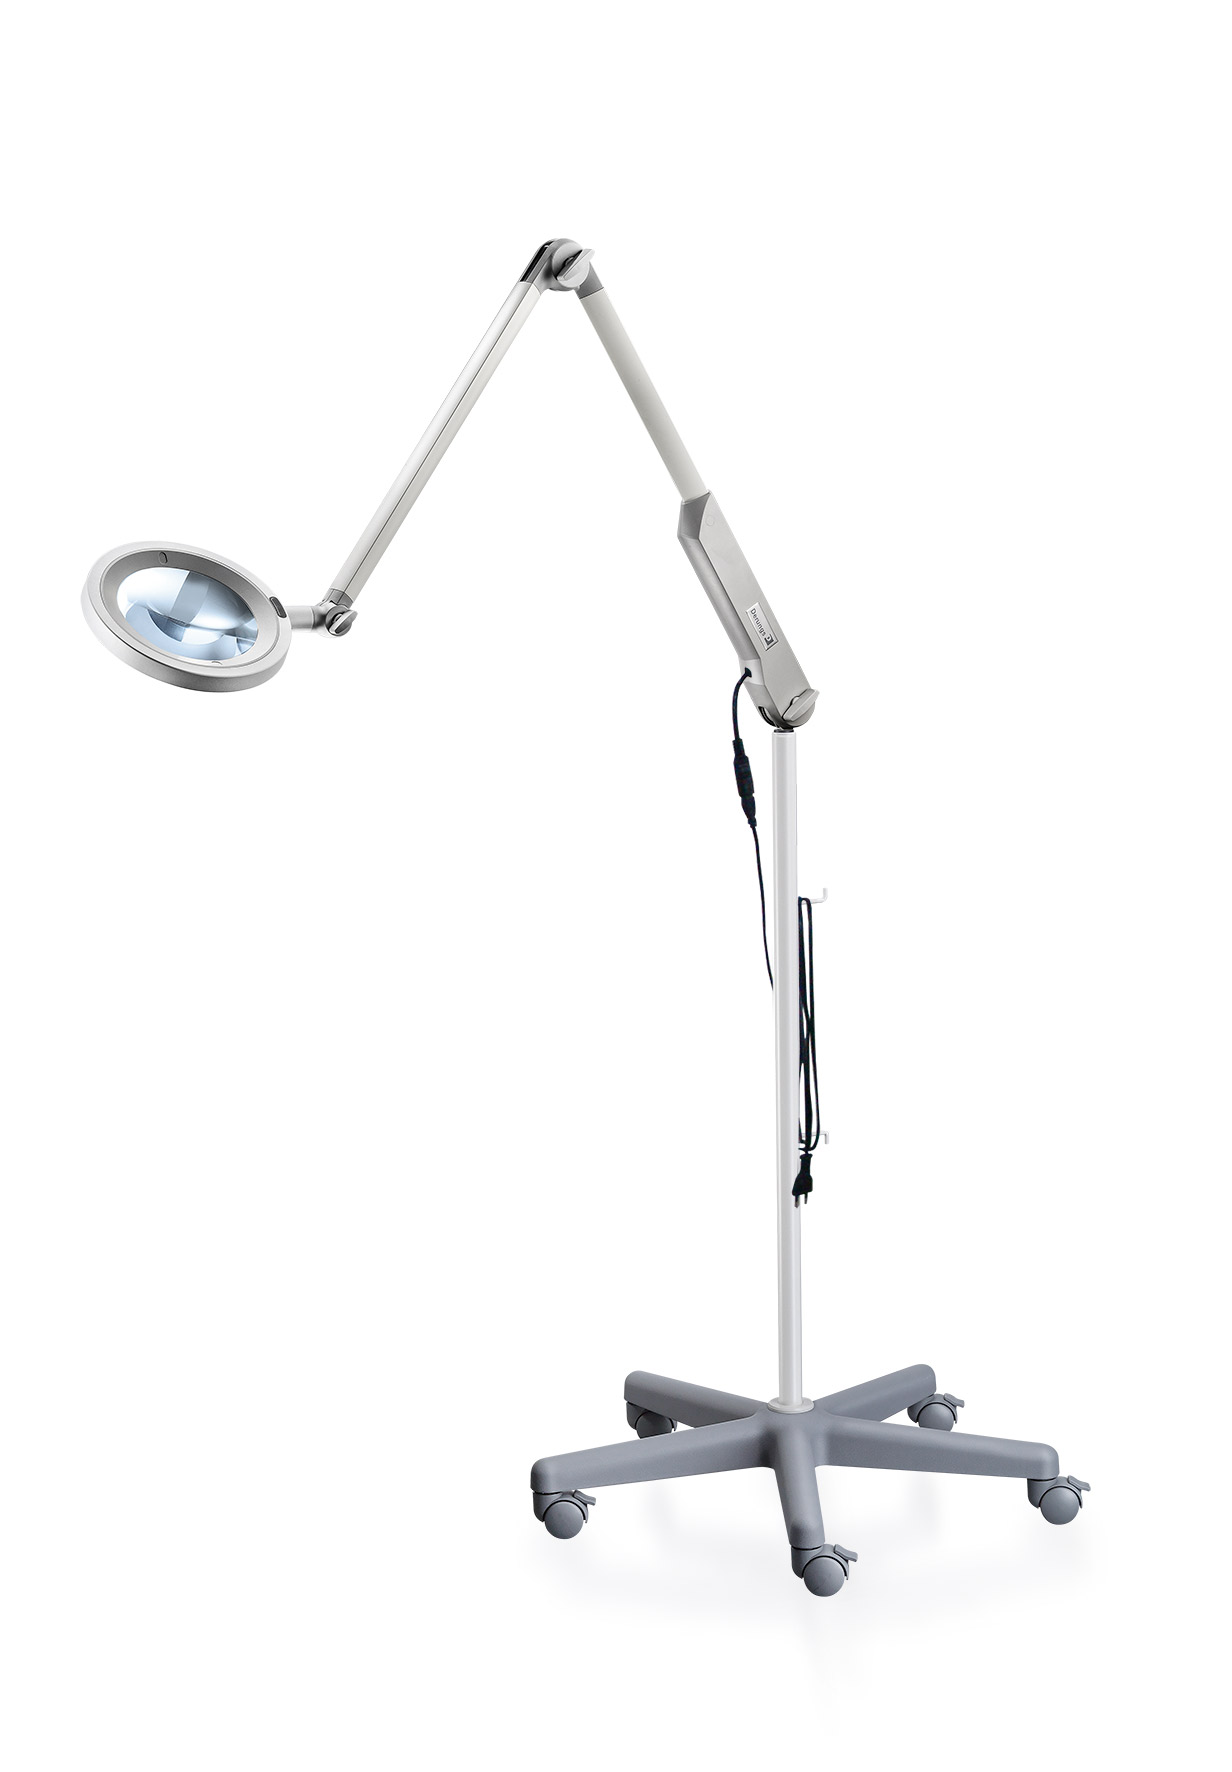 Medical Lighting Opticlux 10 Wall Magnifier Light, on wheel base